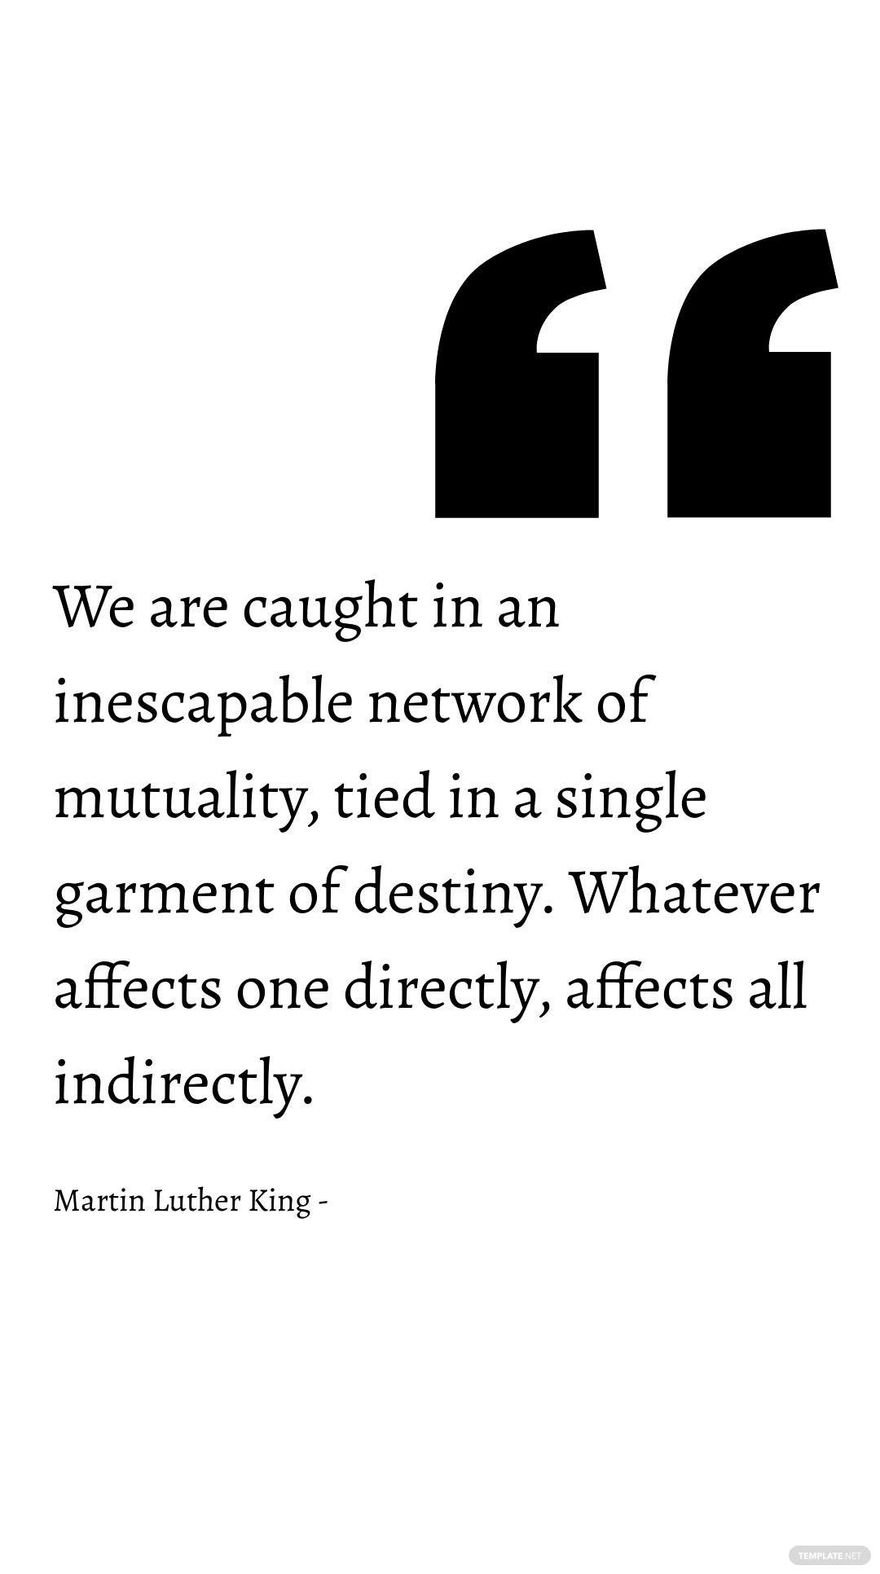 Martin Luther King - We are caught in an inescapable network of mutuality, tied in a single garment of destiny. Whatever affects one directly, affects all indirectly.